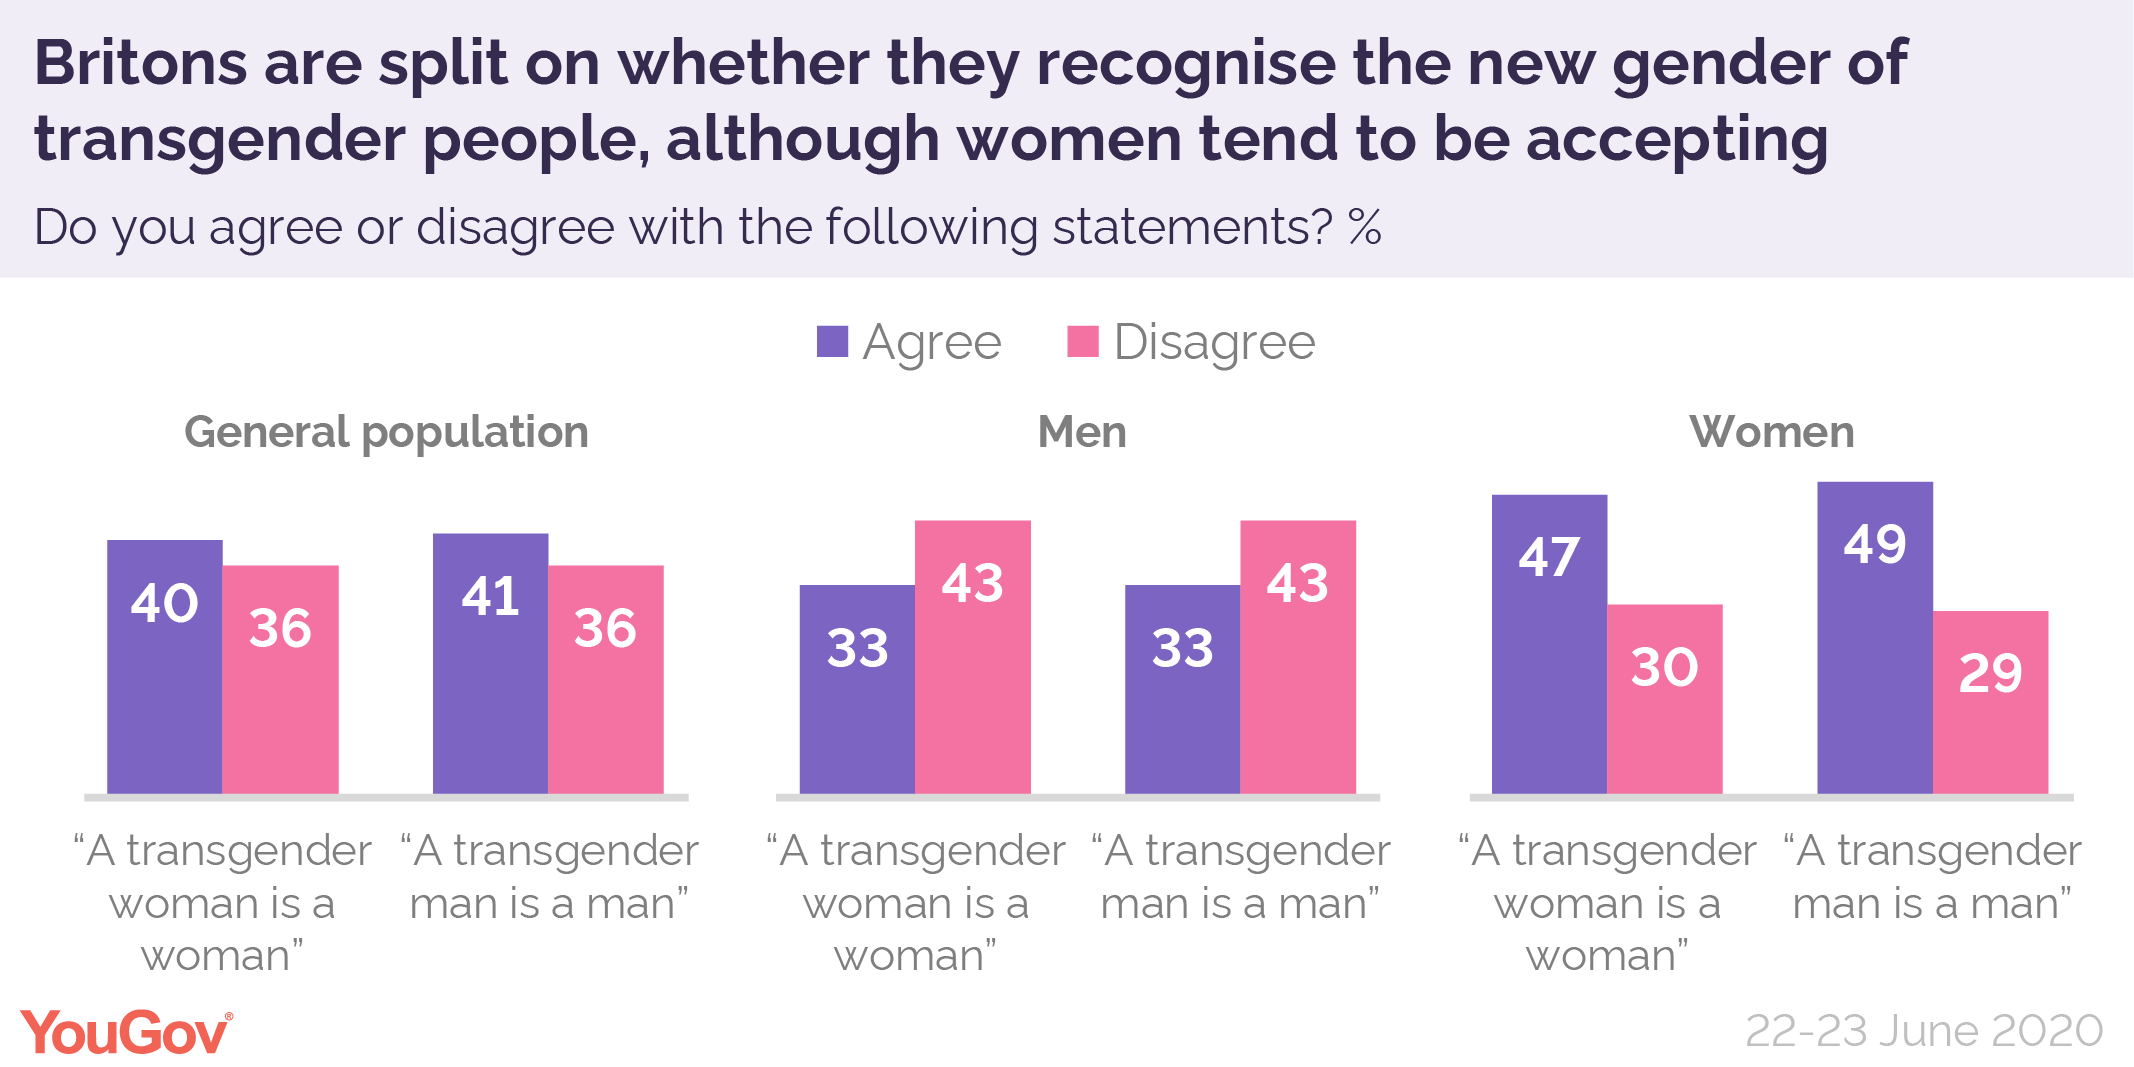 gender reassignment uk law